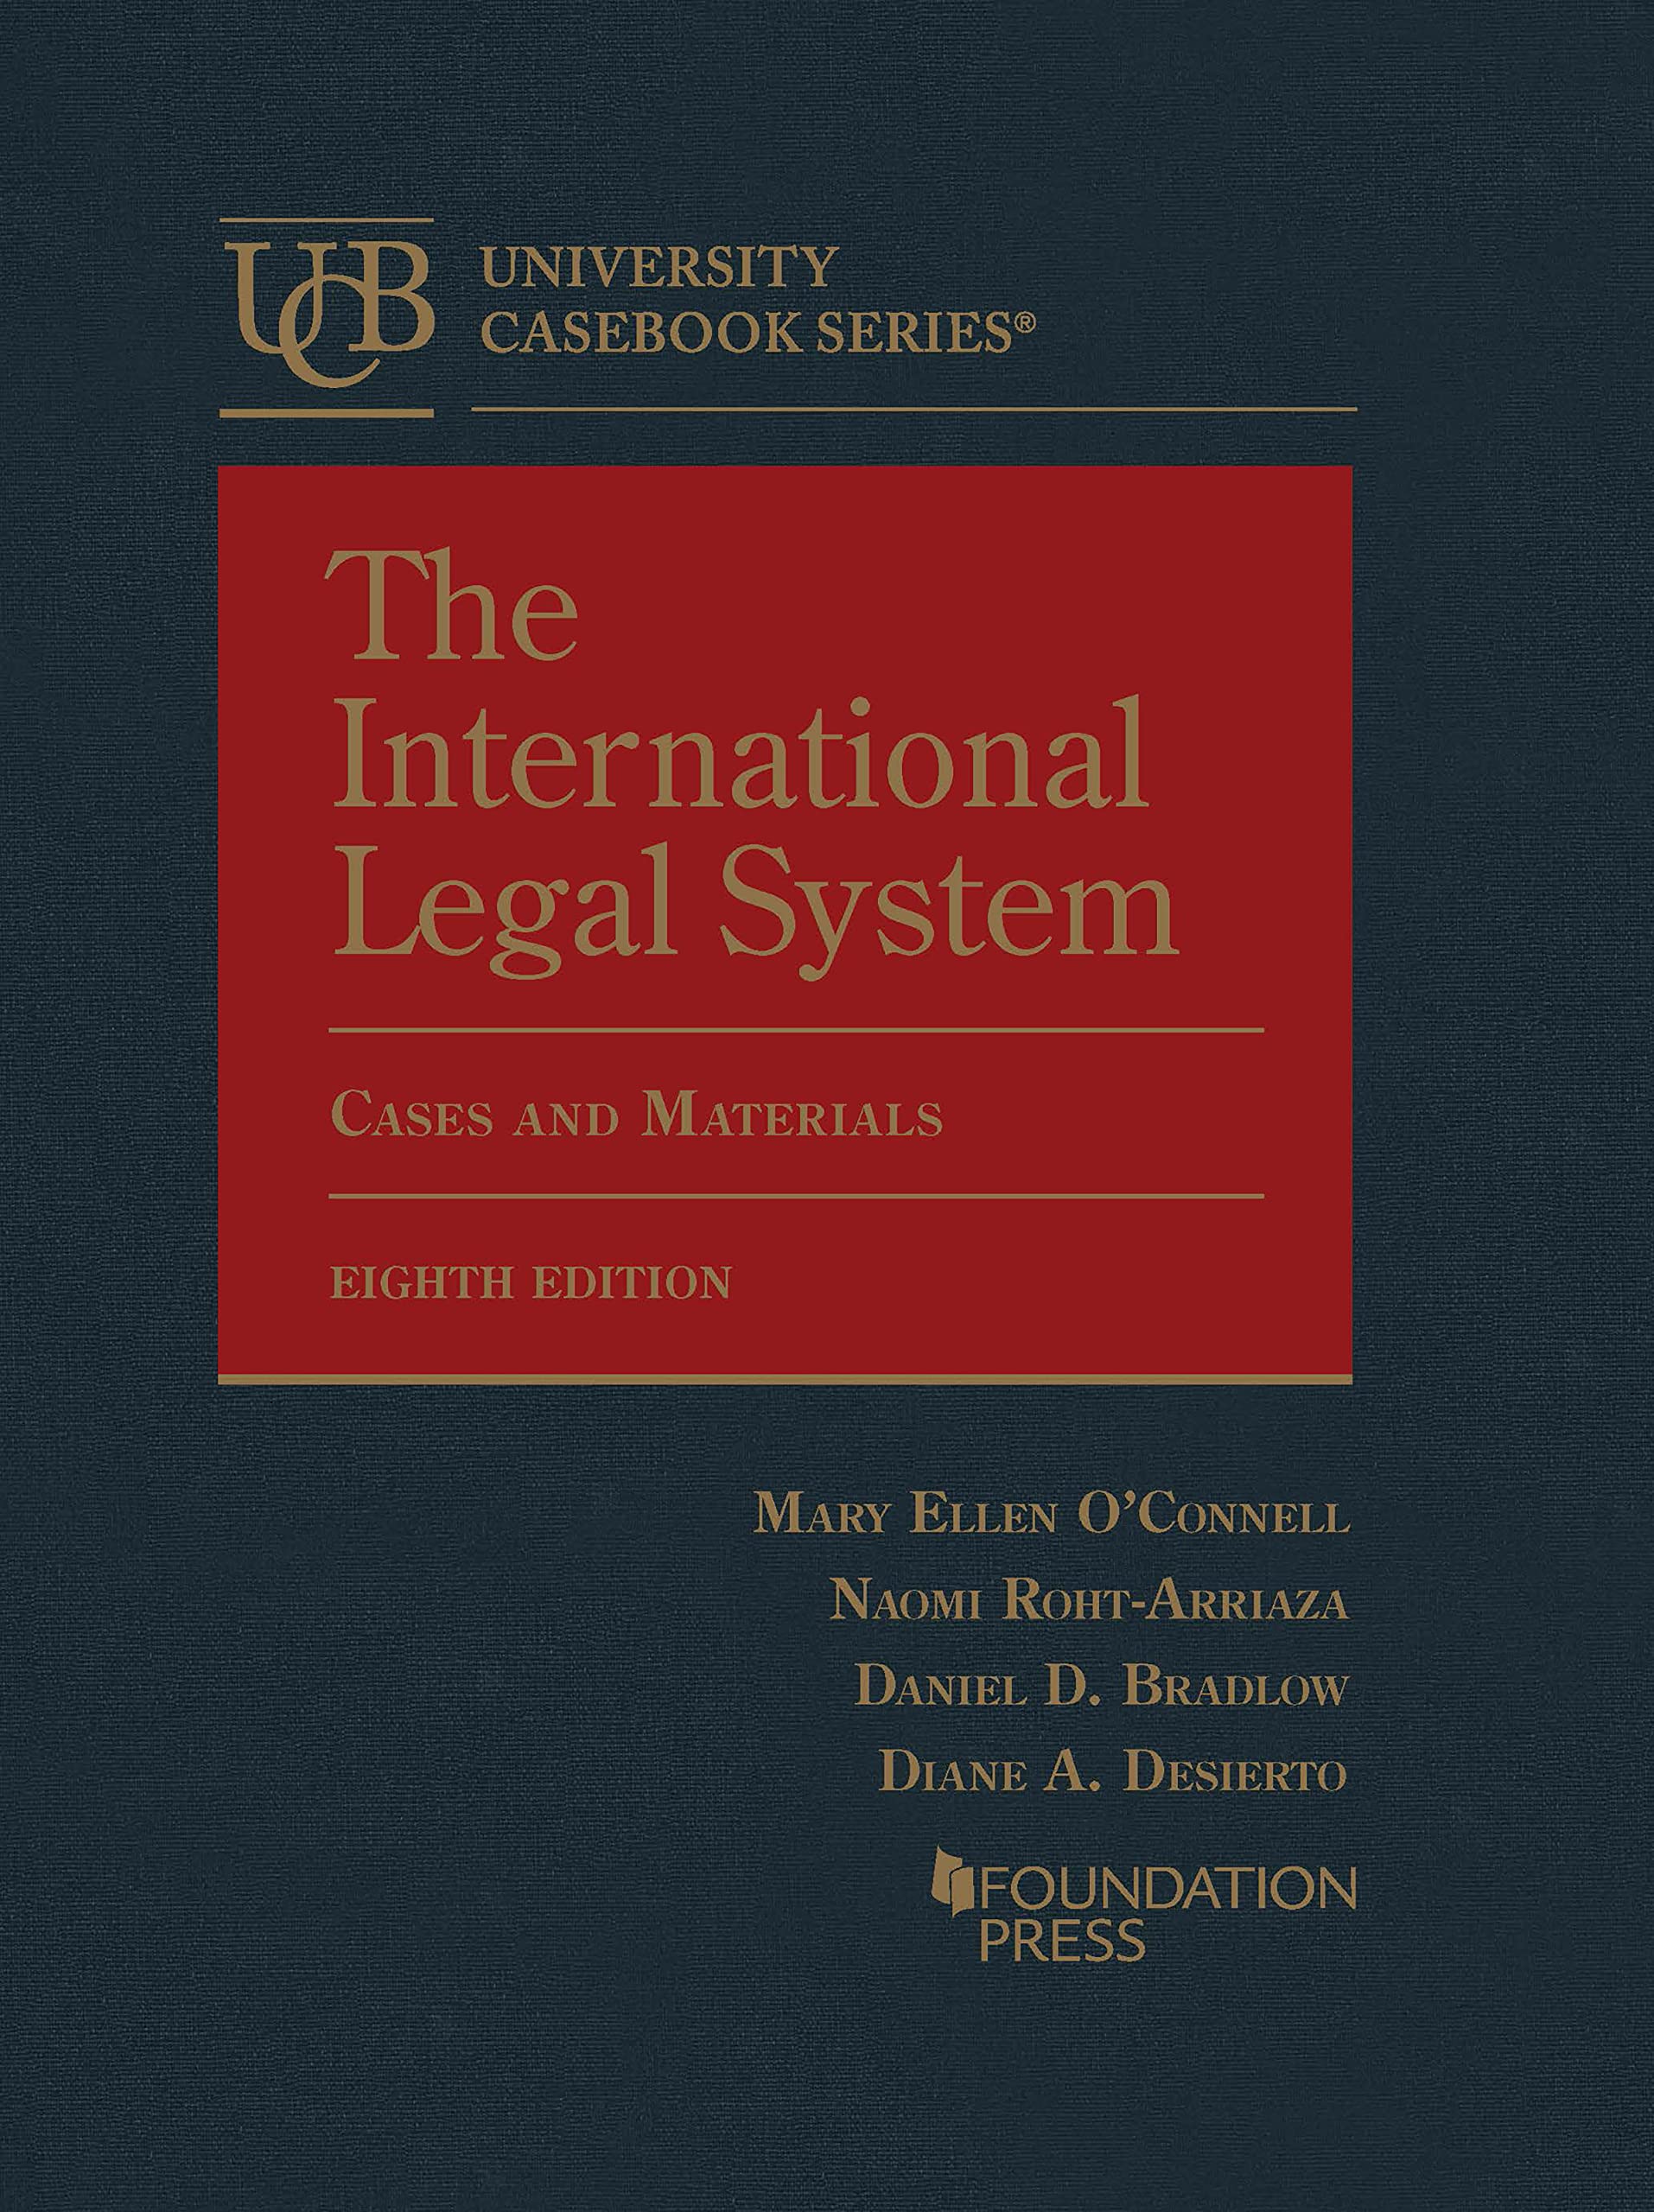 (DK   PDF)The International Legal System, Cases and Materials (University Casebook Series)